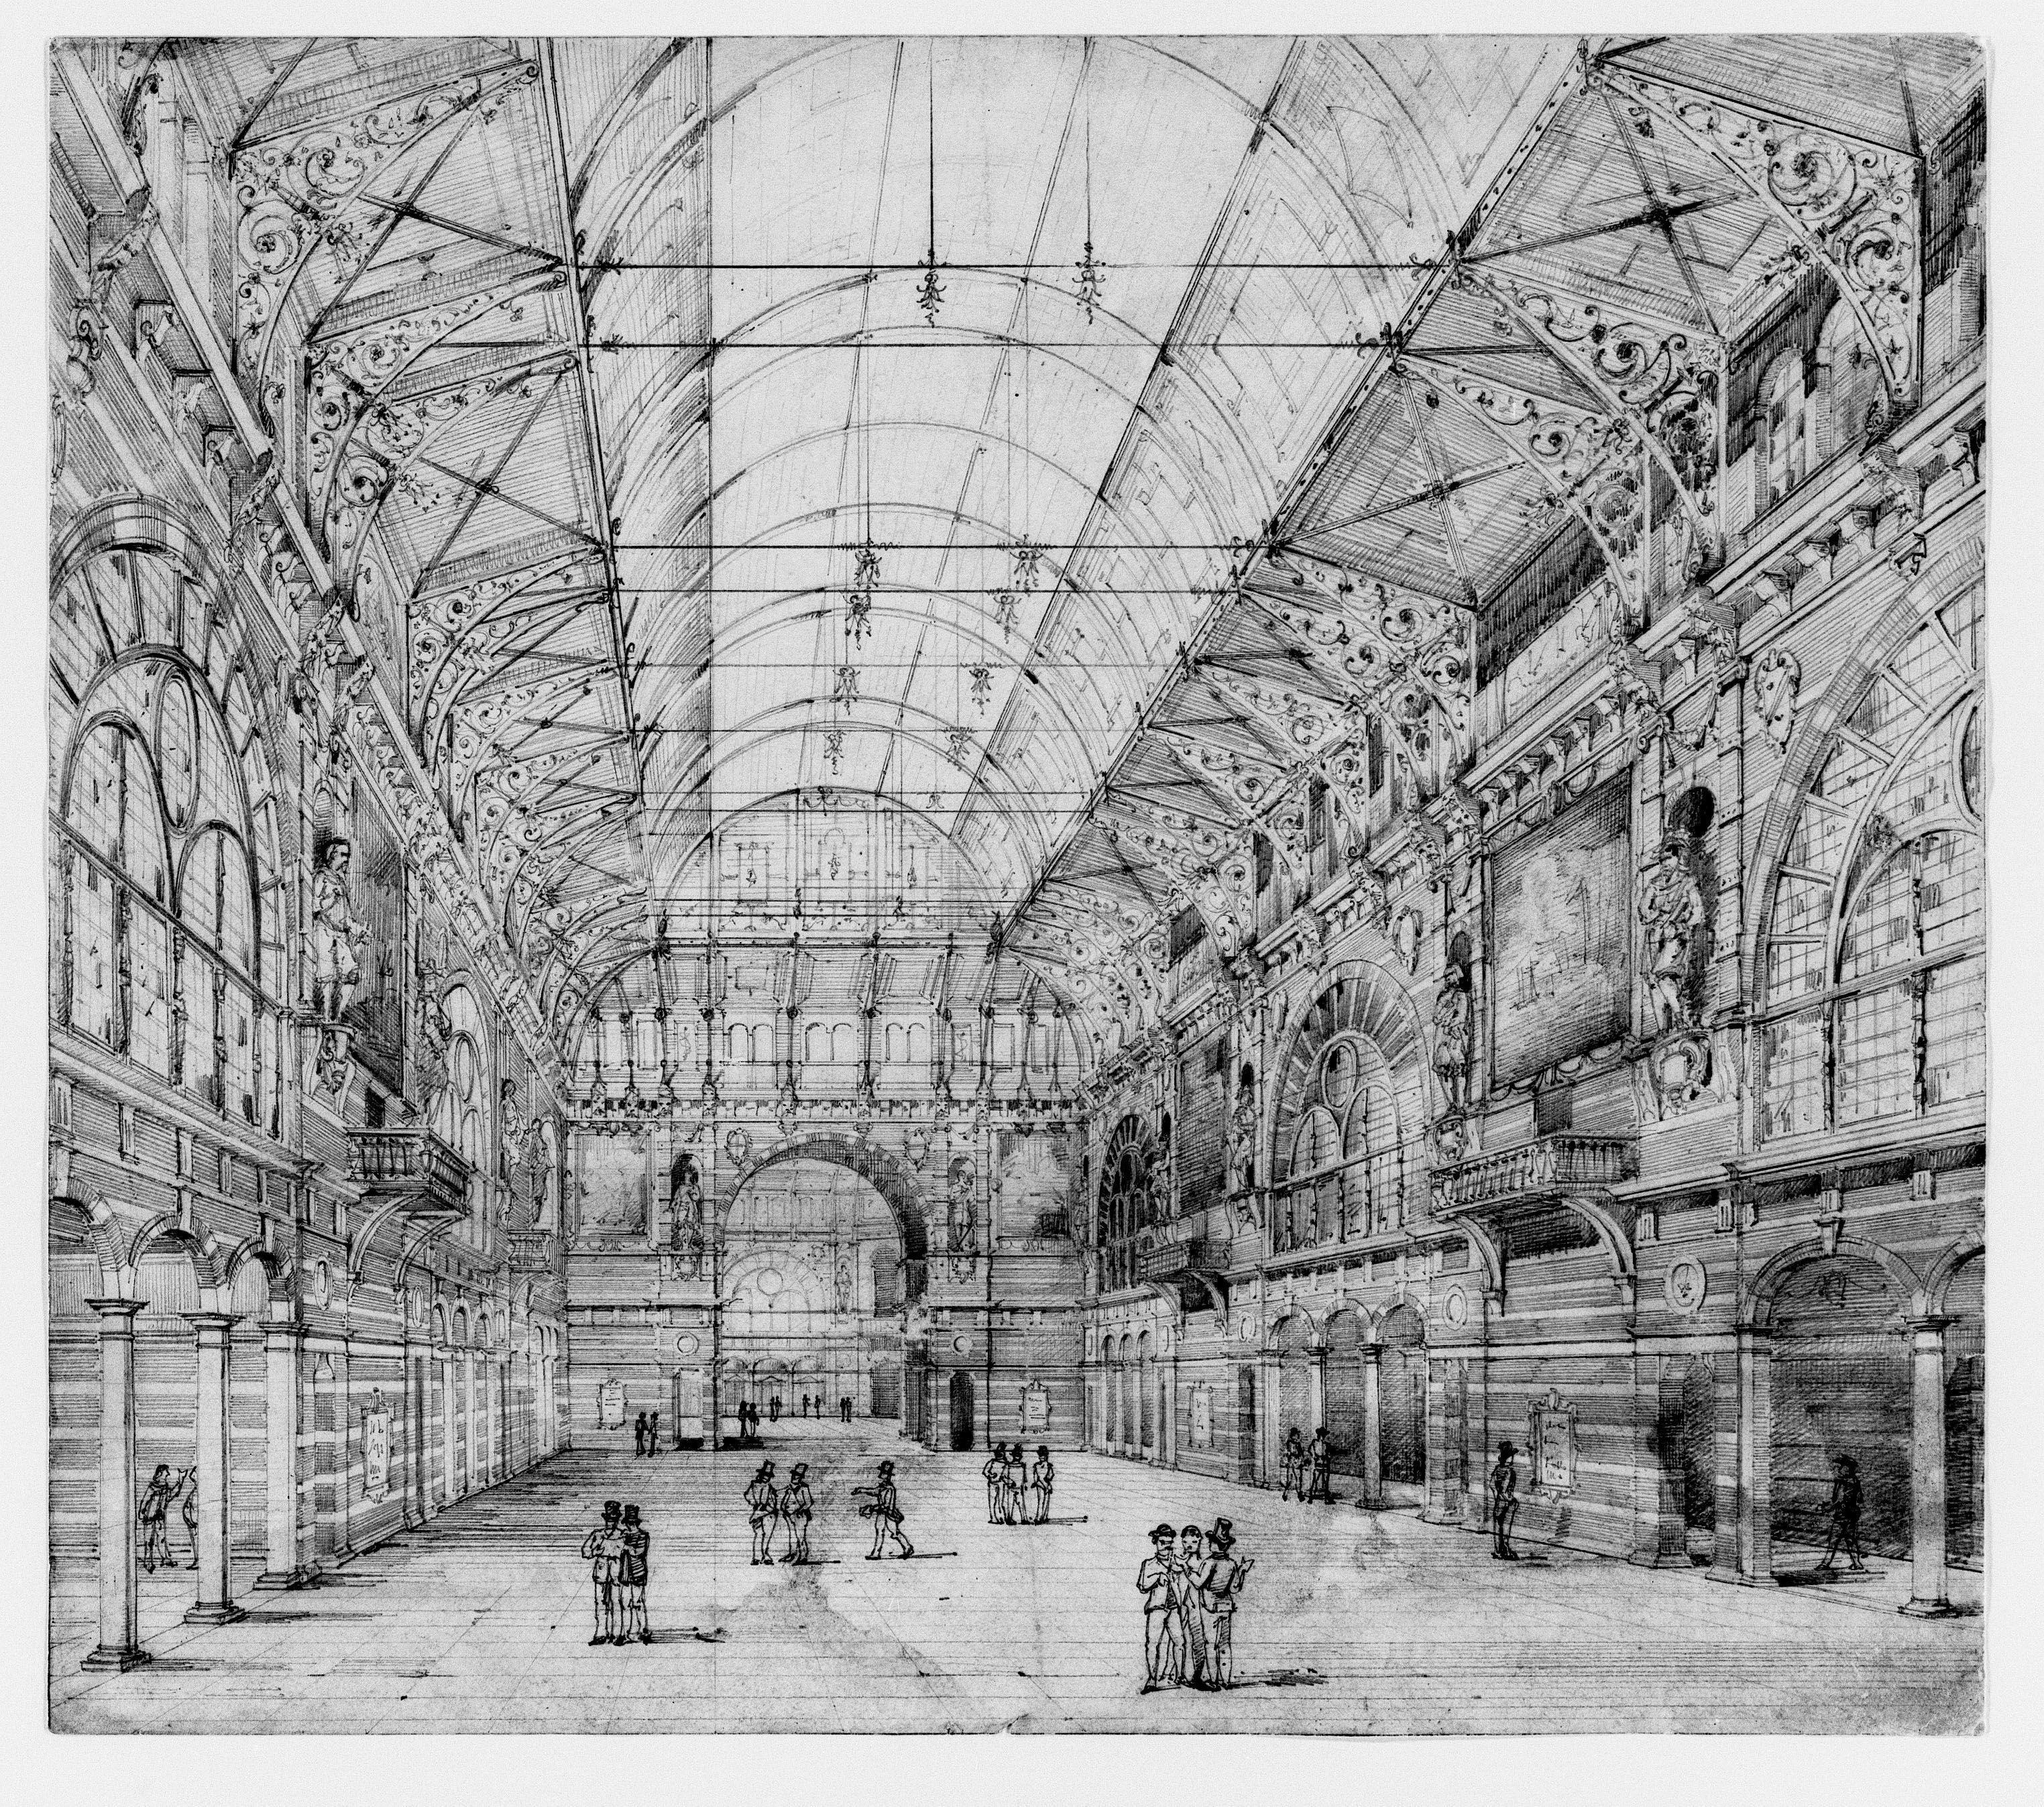 Competition design for a merchant's fair, Amsterdam, interior, perspective drawing.